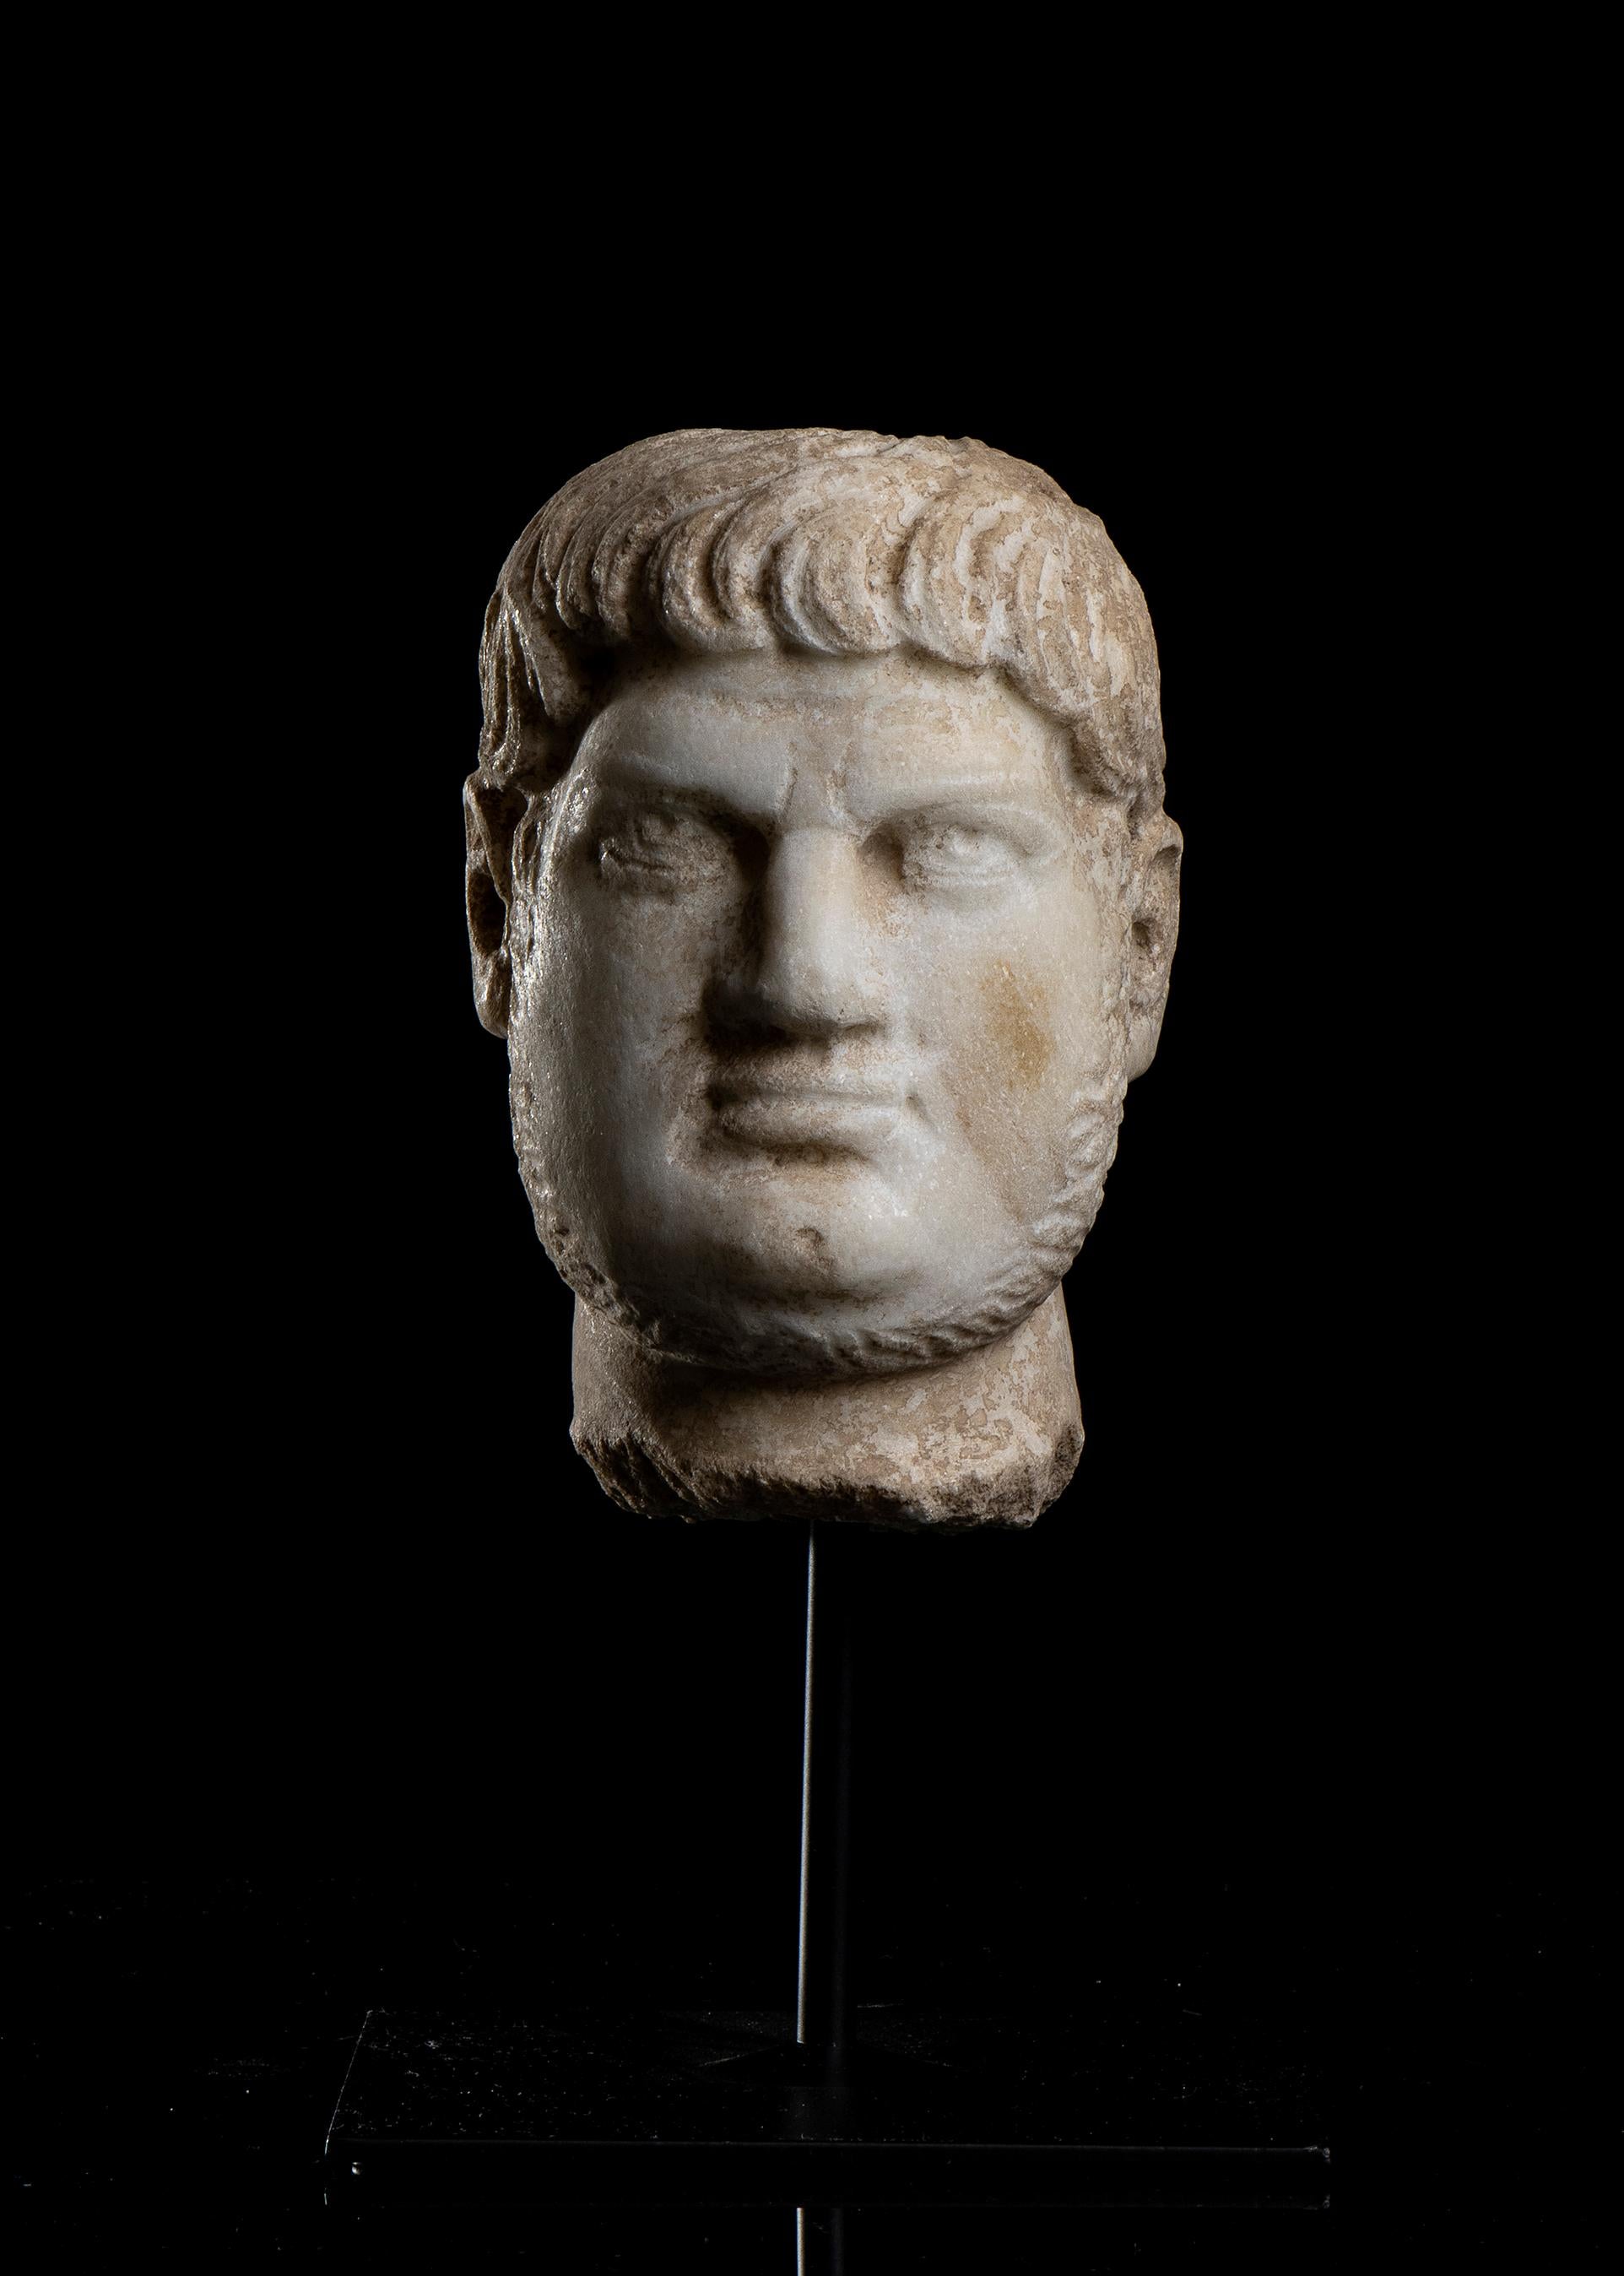 An Italian marble sculpture head, carved in white aged statuary marble probably in central Italy in the first half of the 20th Century, depicting the Roman Emperor Nero Claudius Caesar Augustus Germanicus universally know as Nero and of of the most